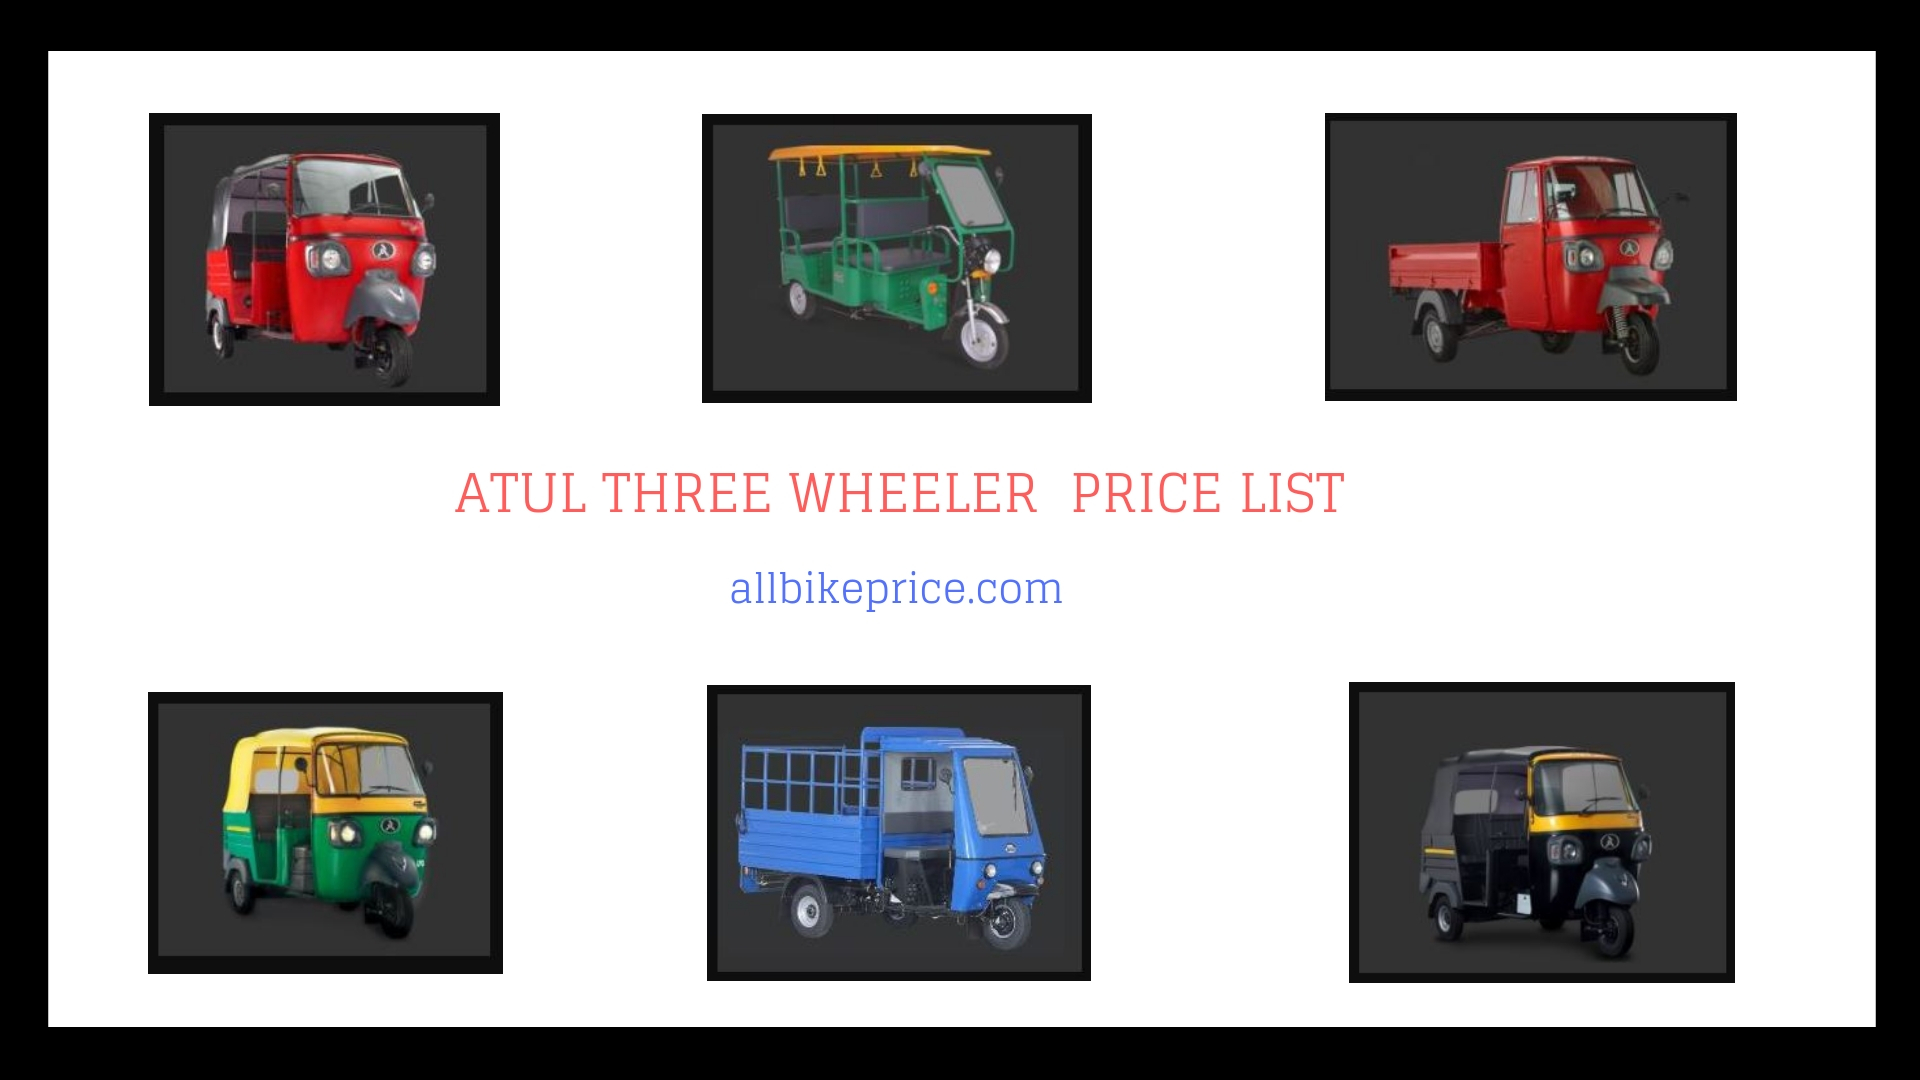 Atul Auto Price List In India - Commercial Vehicle - HD Wallpaper 